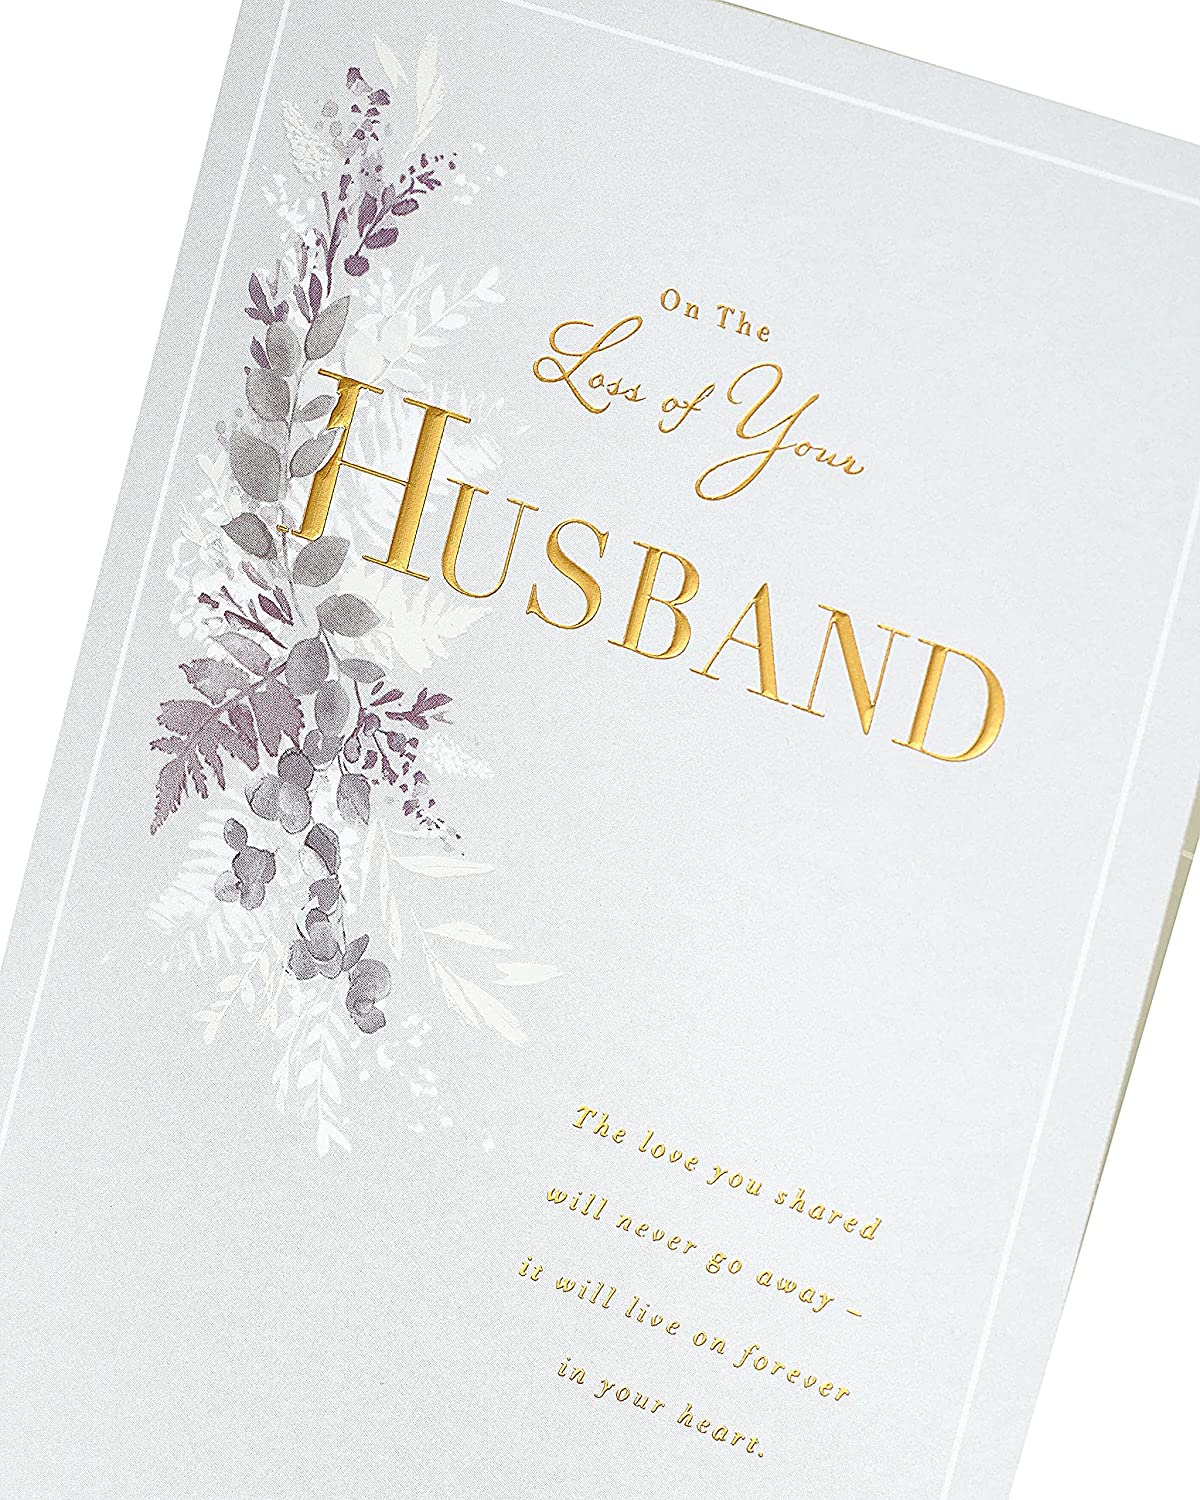 On The Loss of Your Husband Gold Foil Details Sympathy Card